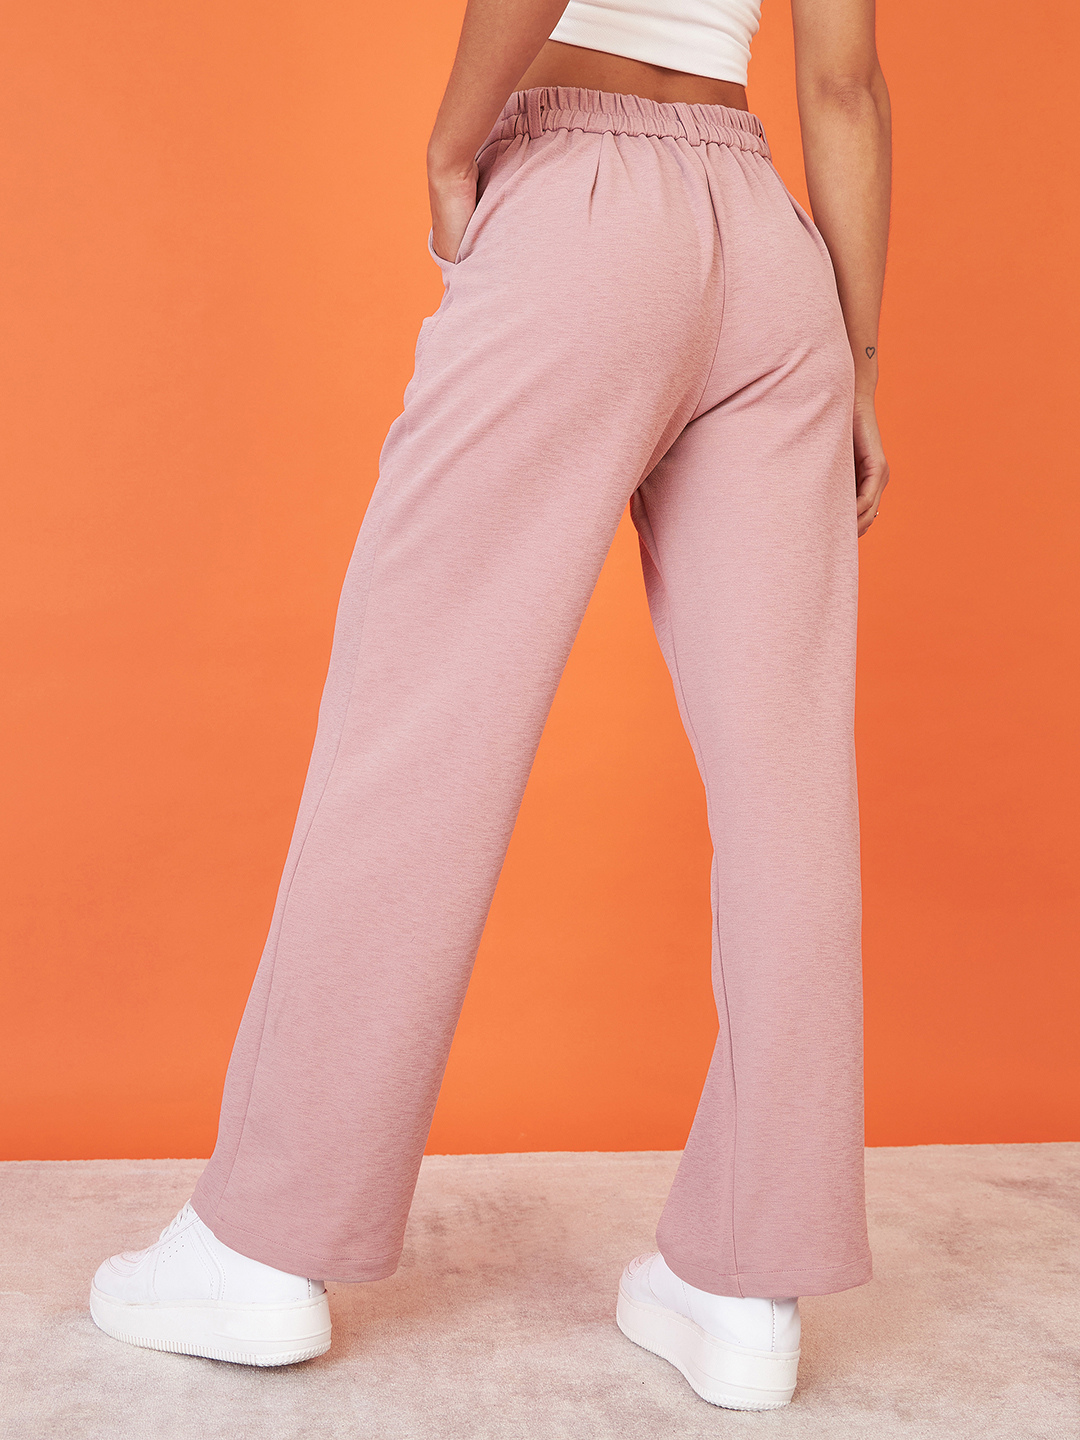 Relaxed Korean Front Pleated Pants - Uptownie